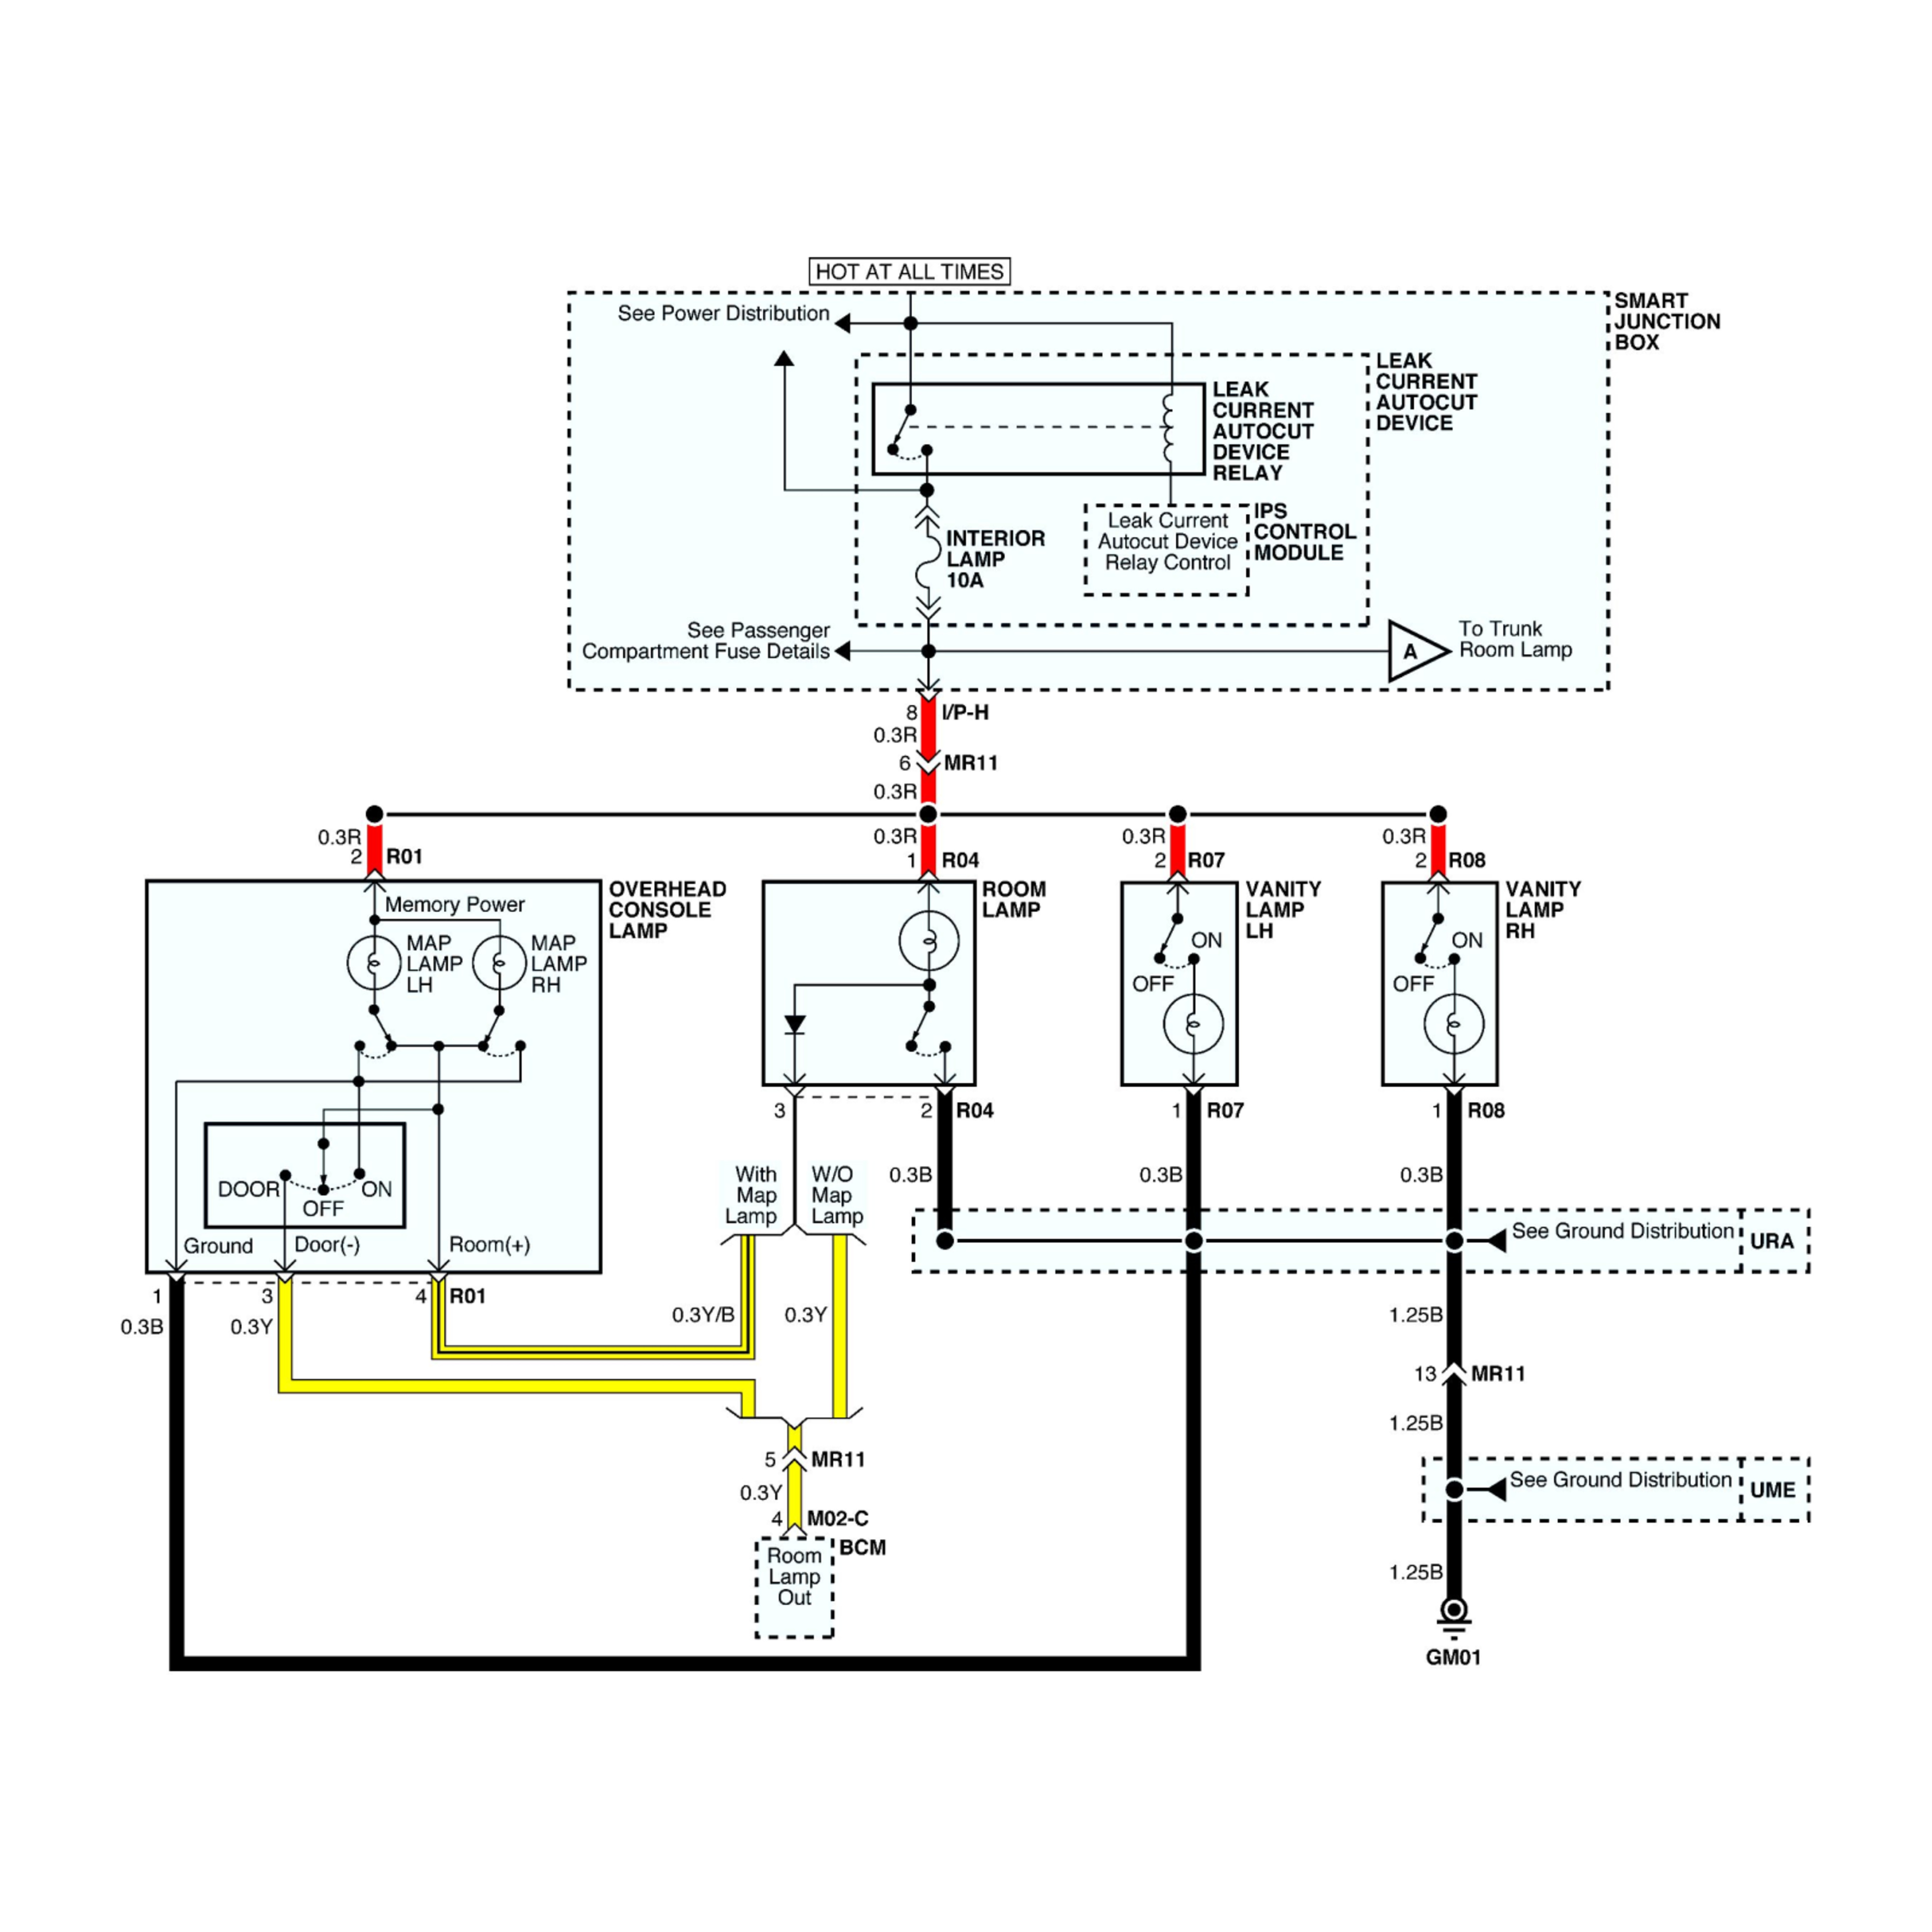 2013 Nissan GT-R wiring diagrams example